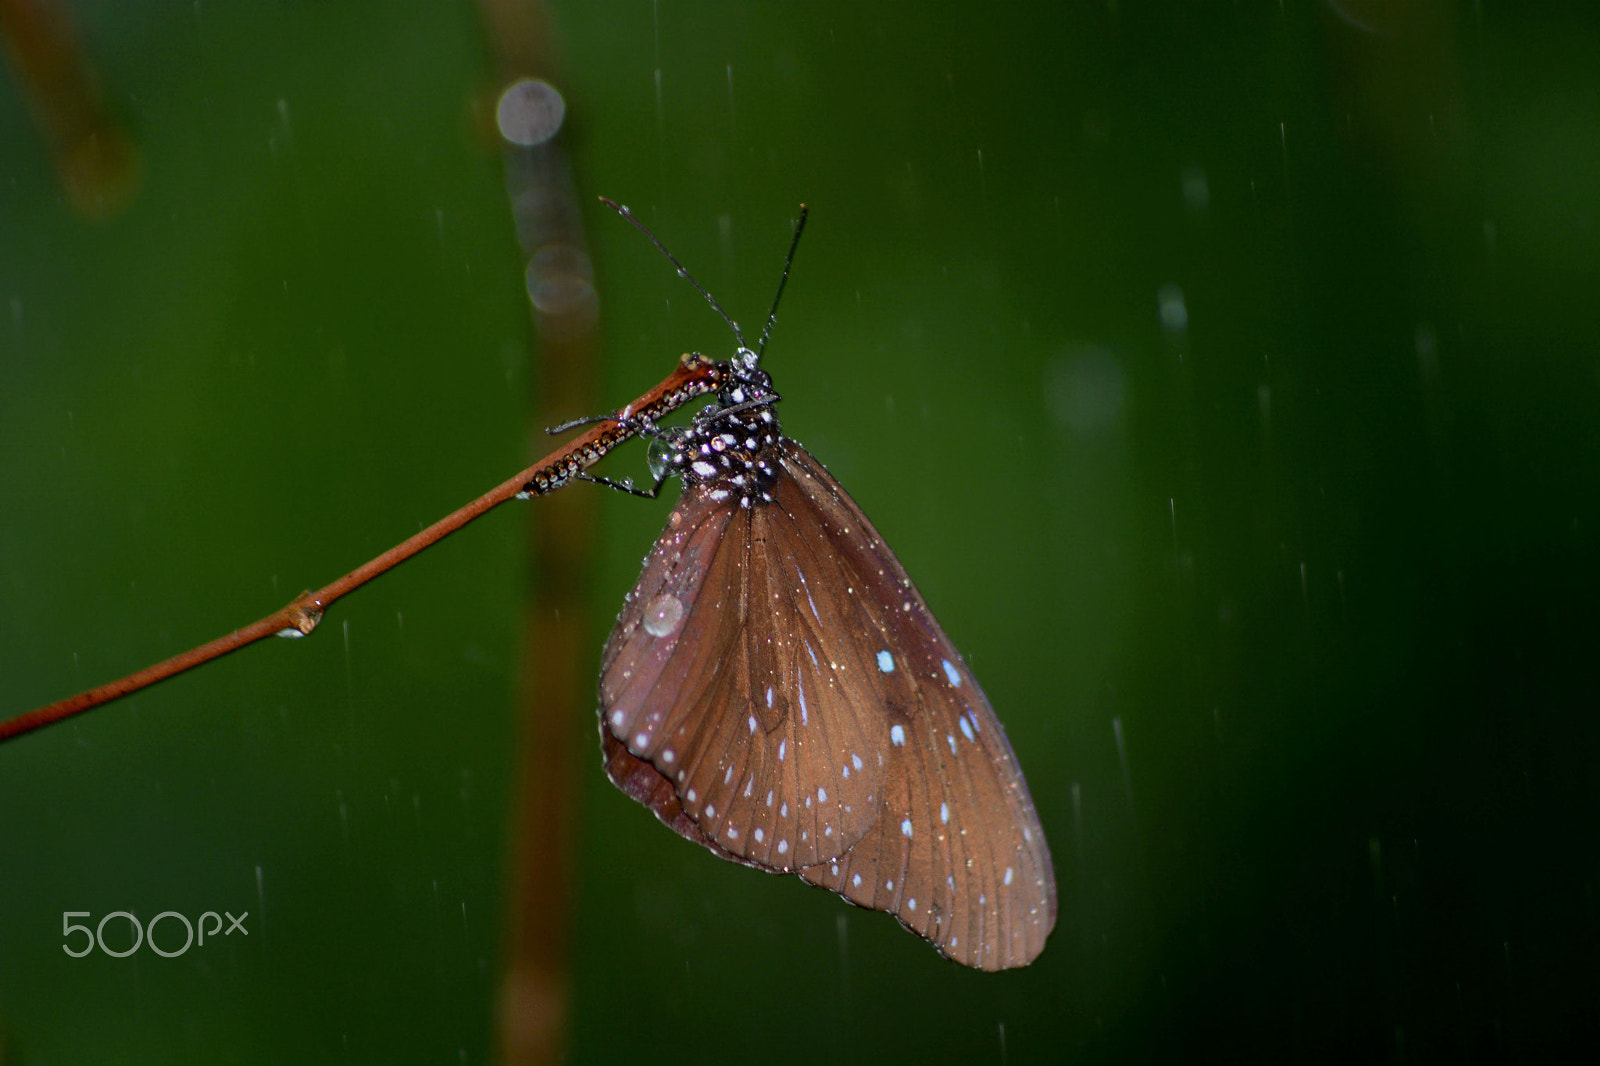 AF Nikkor 50mm f/1.8D + 1.4x sample photo. Butterfly in rain photography